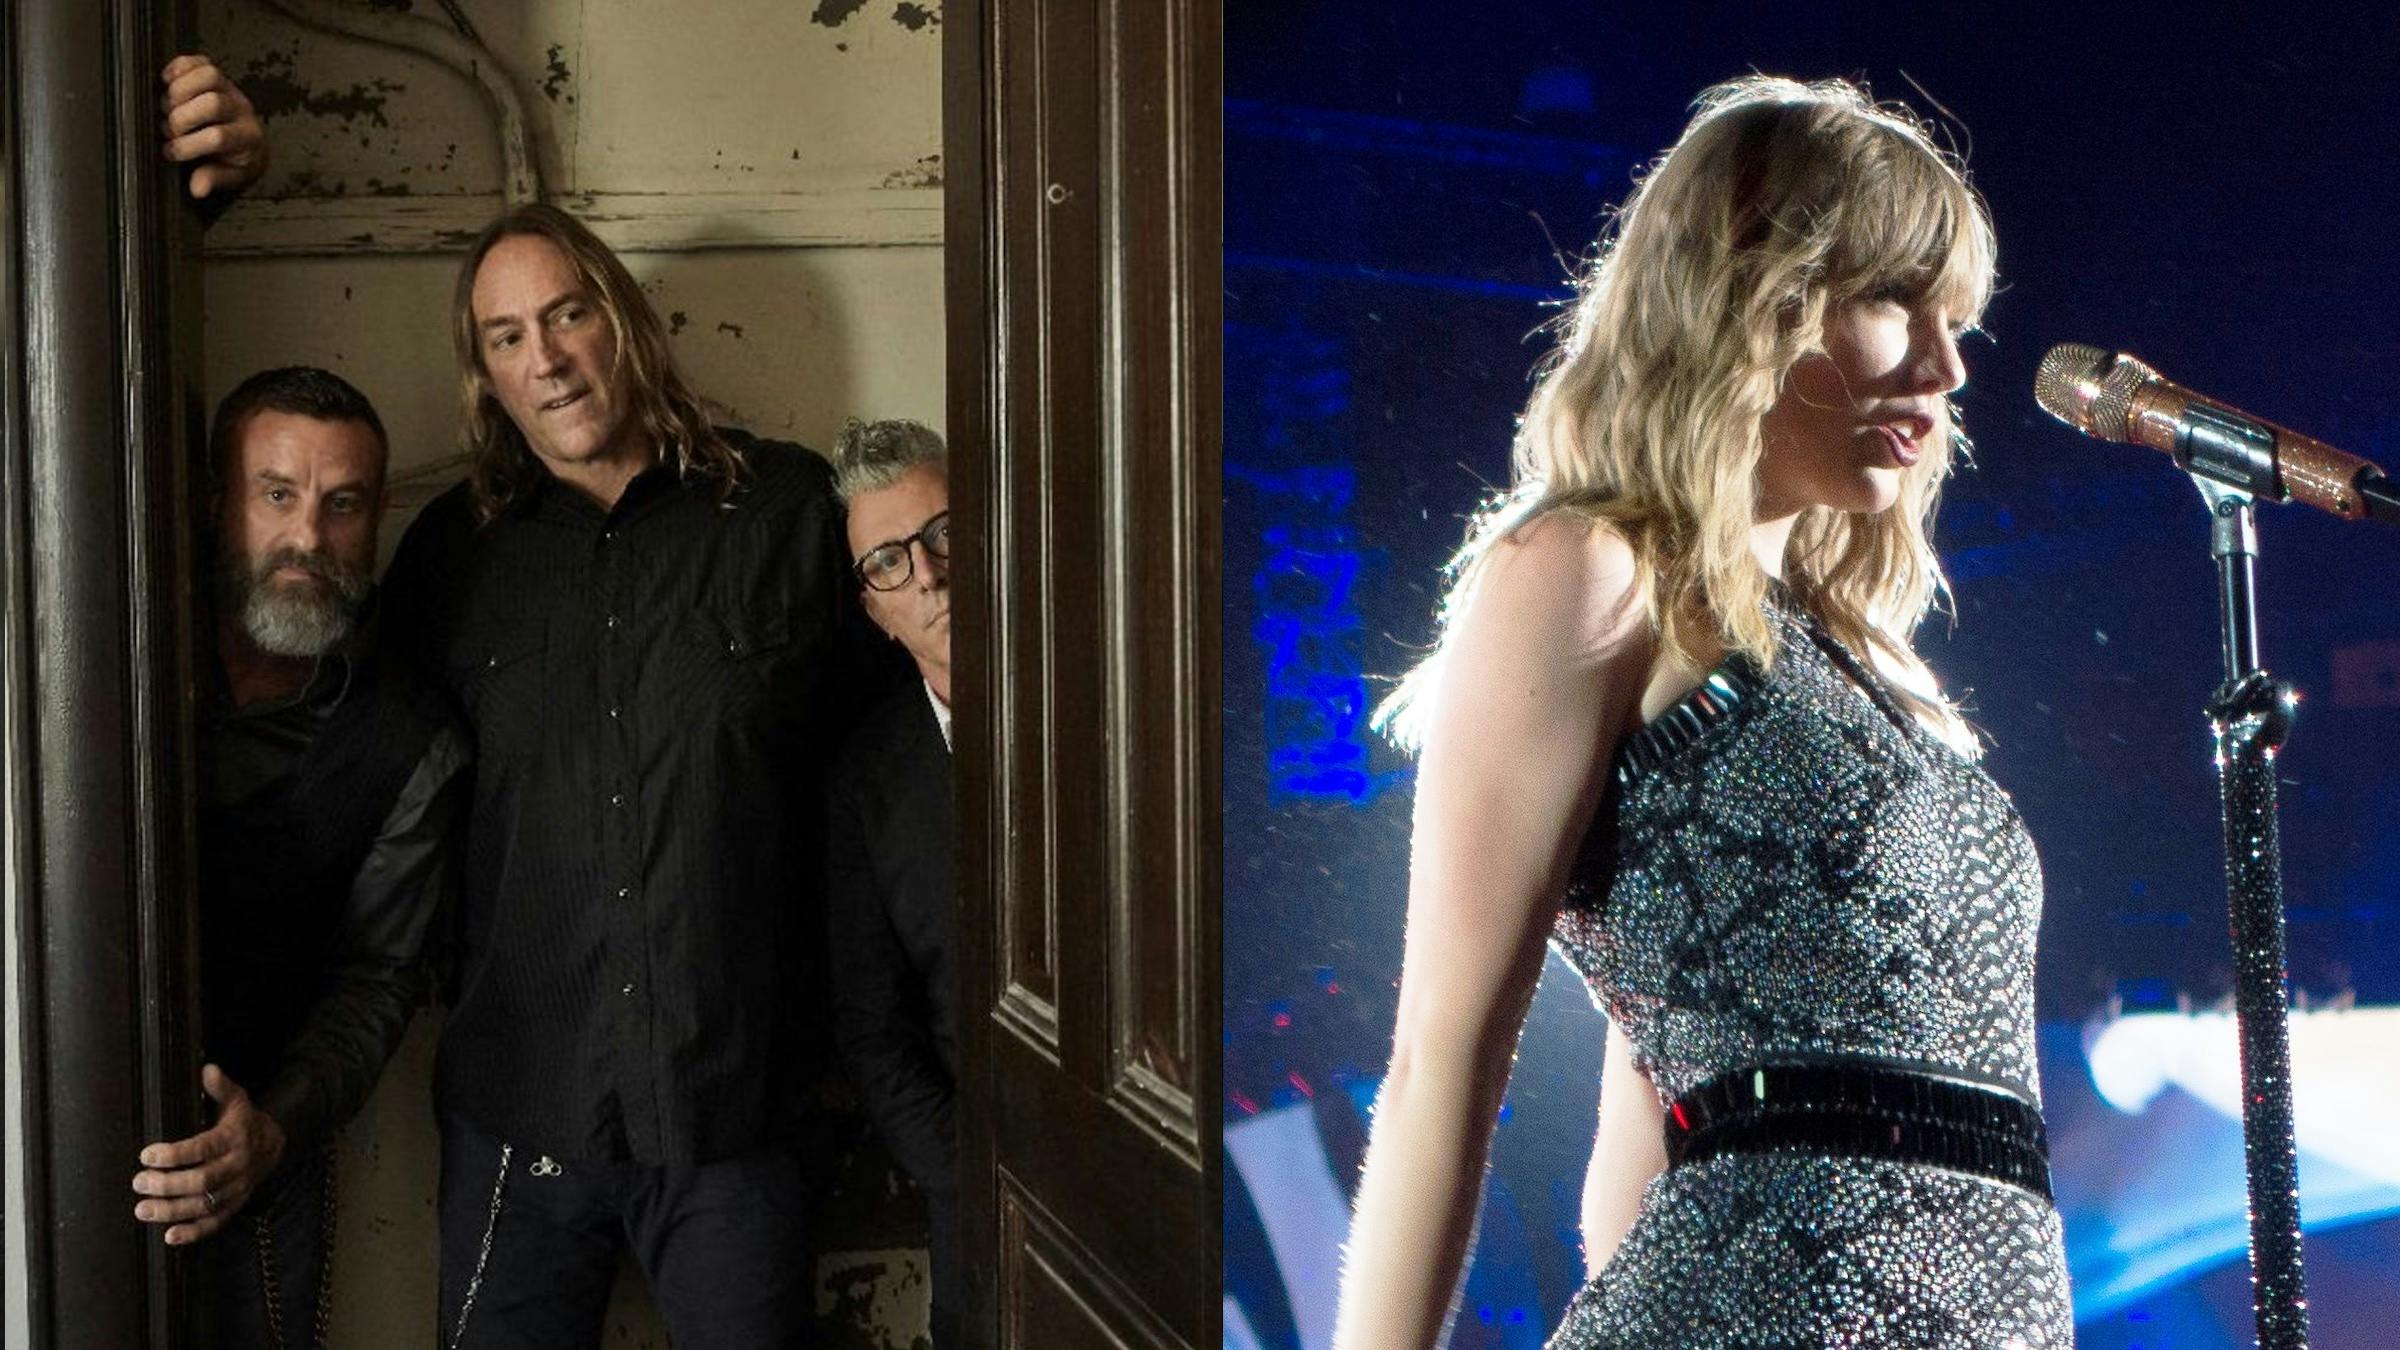 This Tool/Taylor Swift Mash-Up Will Make You Question Everything